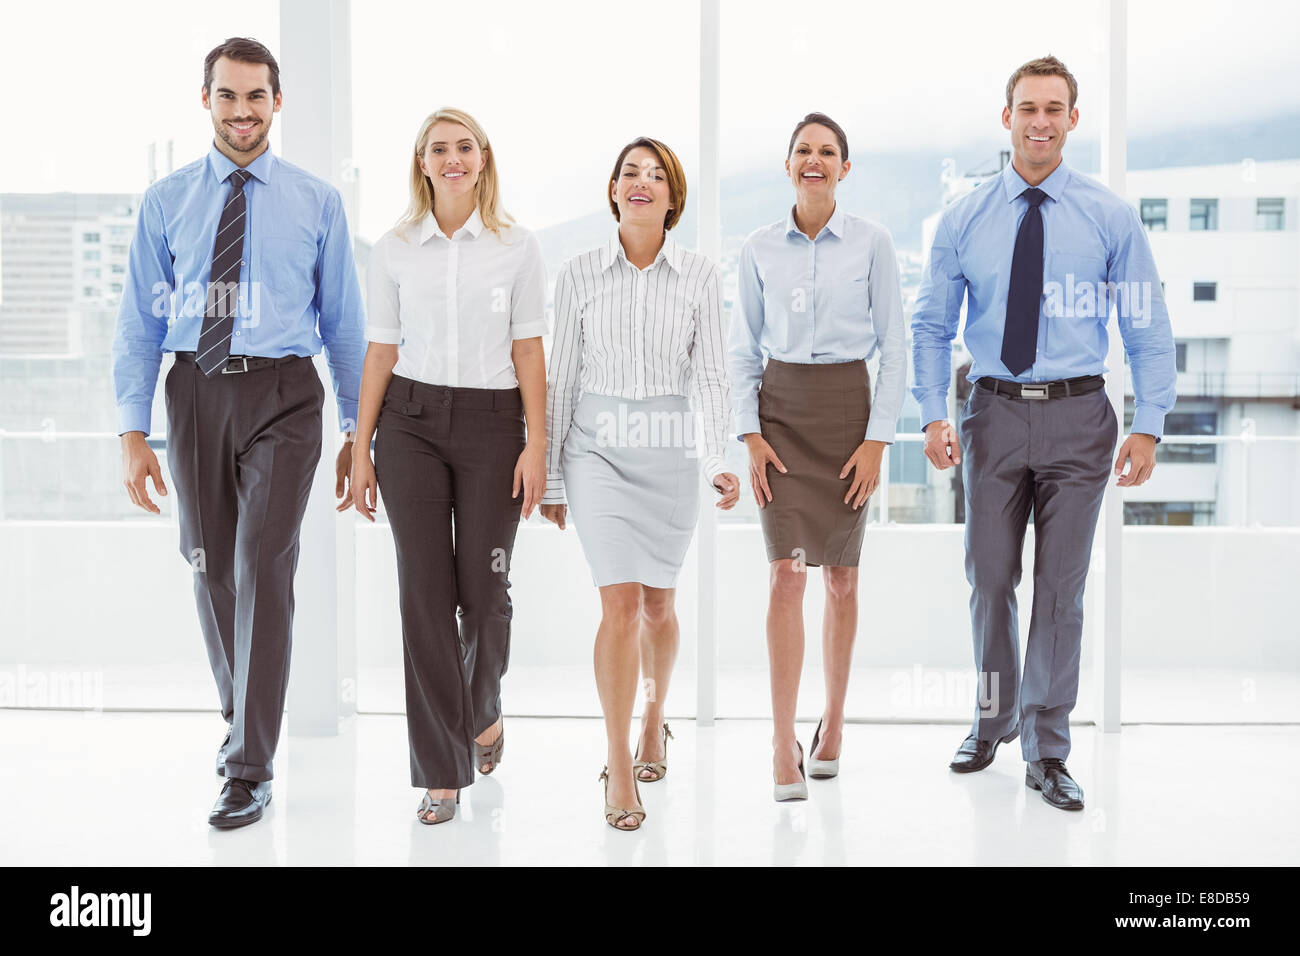 Business people walking together in office Stock Photo